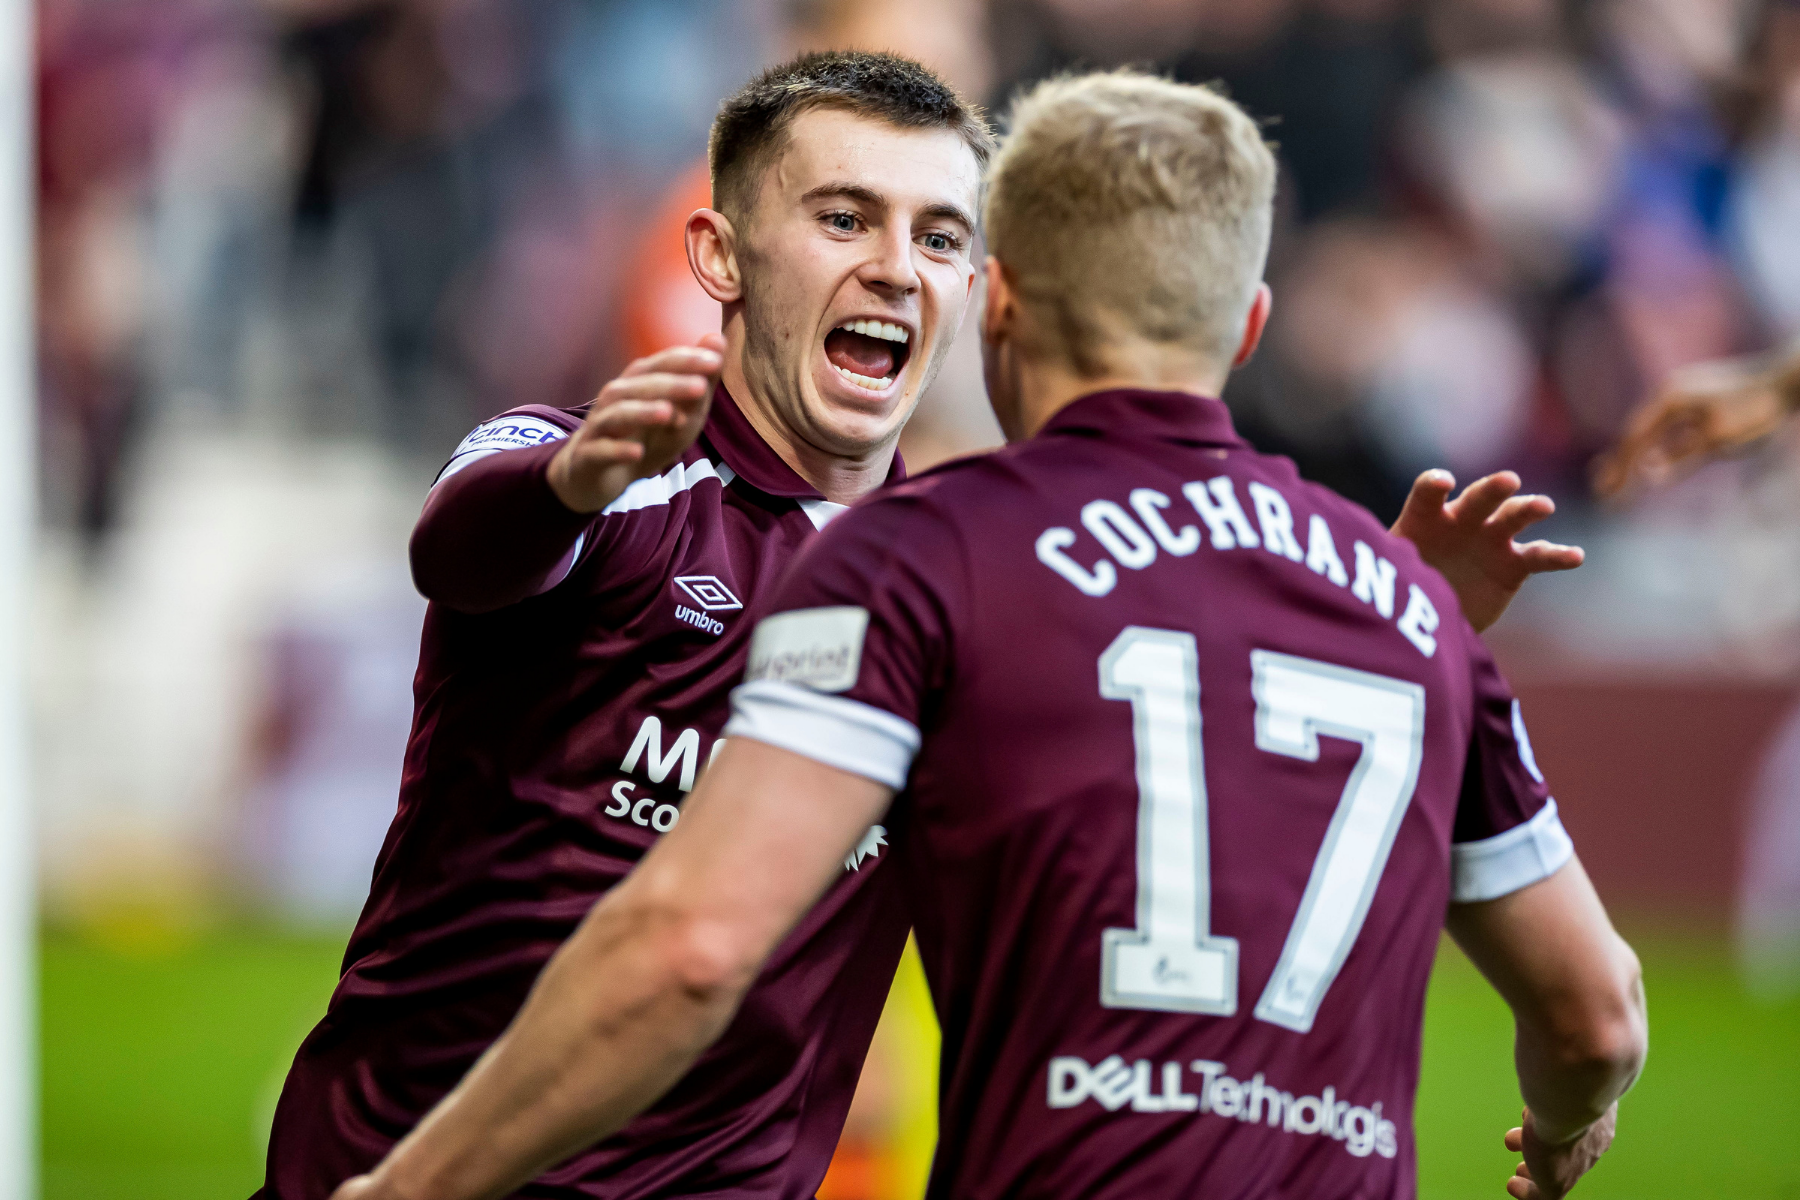 Hearts 5-2 Dundee United: Tynecastle club leapfrog Celtic in Premiership after seven goal thriller